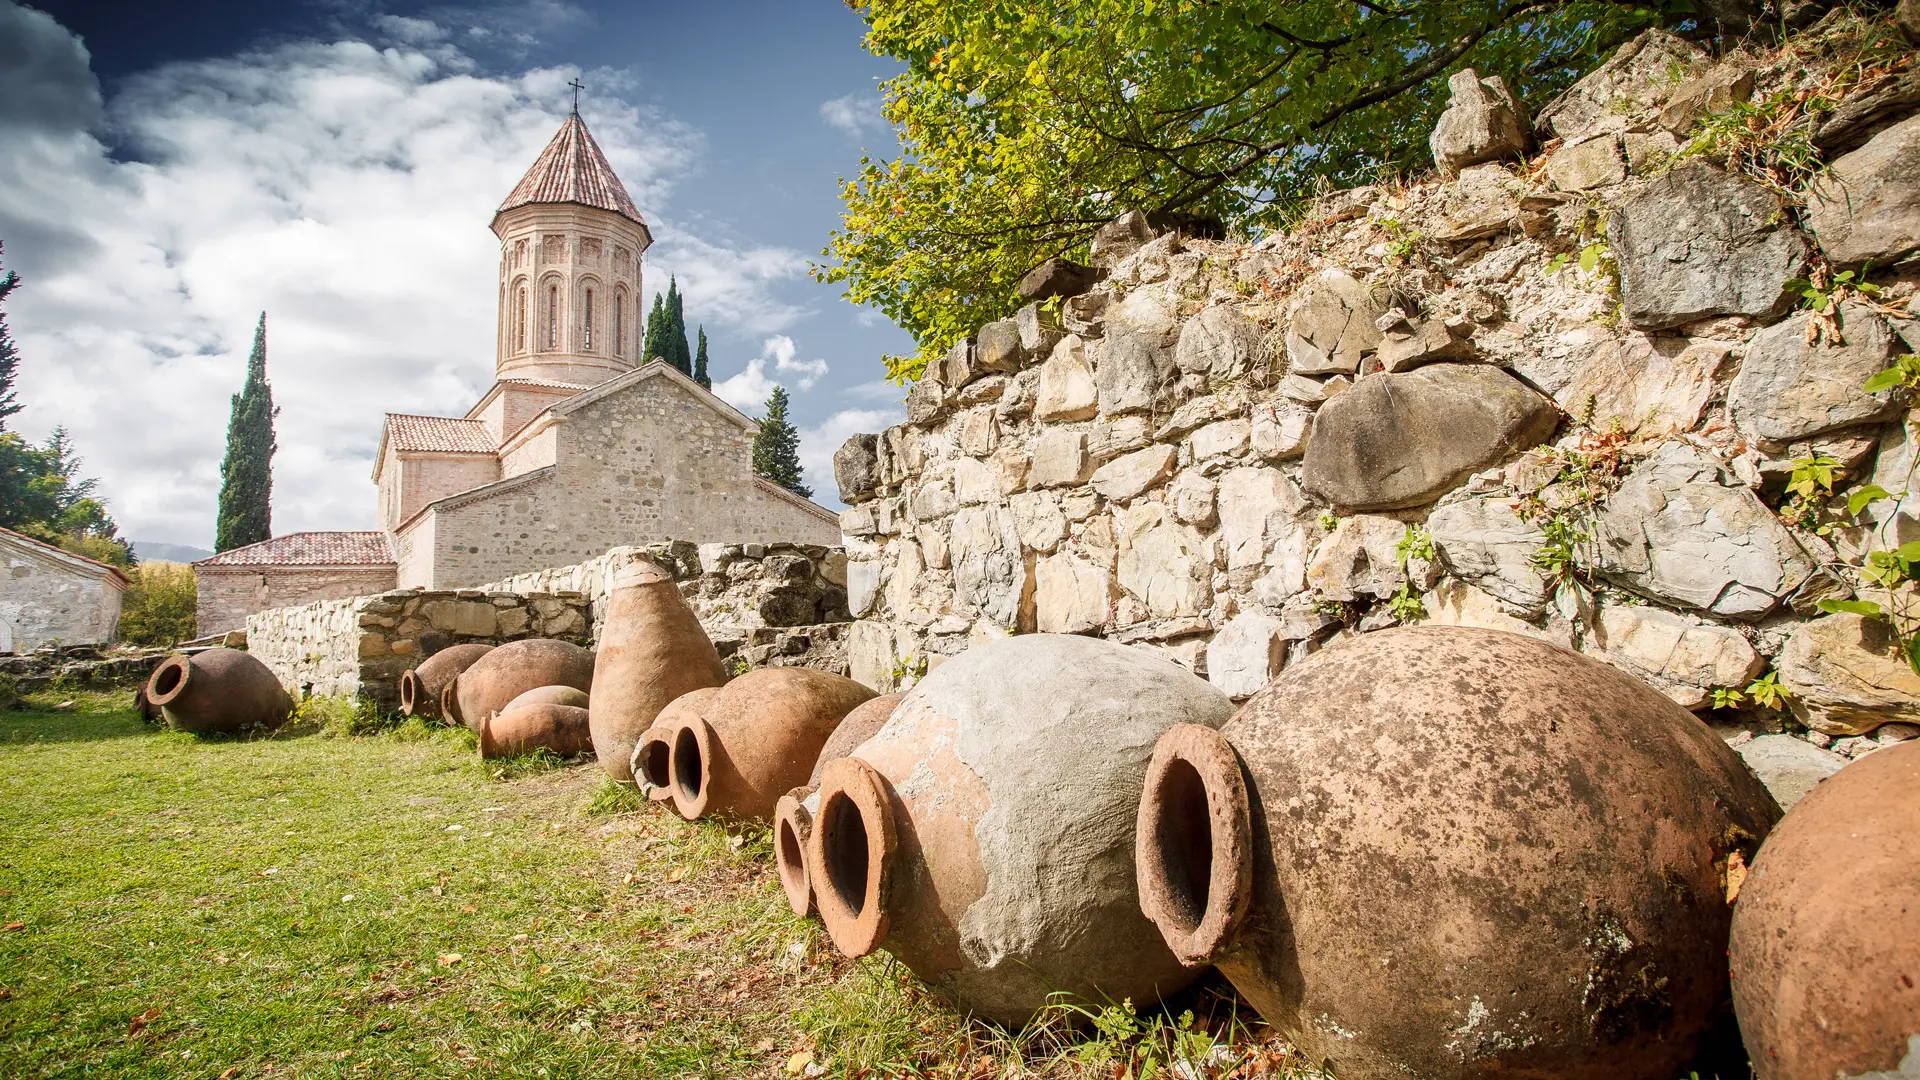 Qvevri wine pots in the Alazani Valley, with a medieval Orthodox church and the Caucasus Mountains in the distance, reflecting Georgia's winemaking heritage.